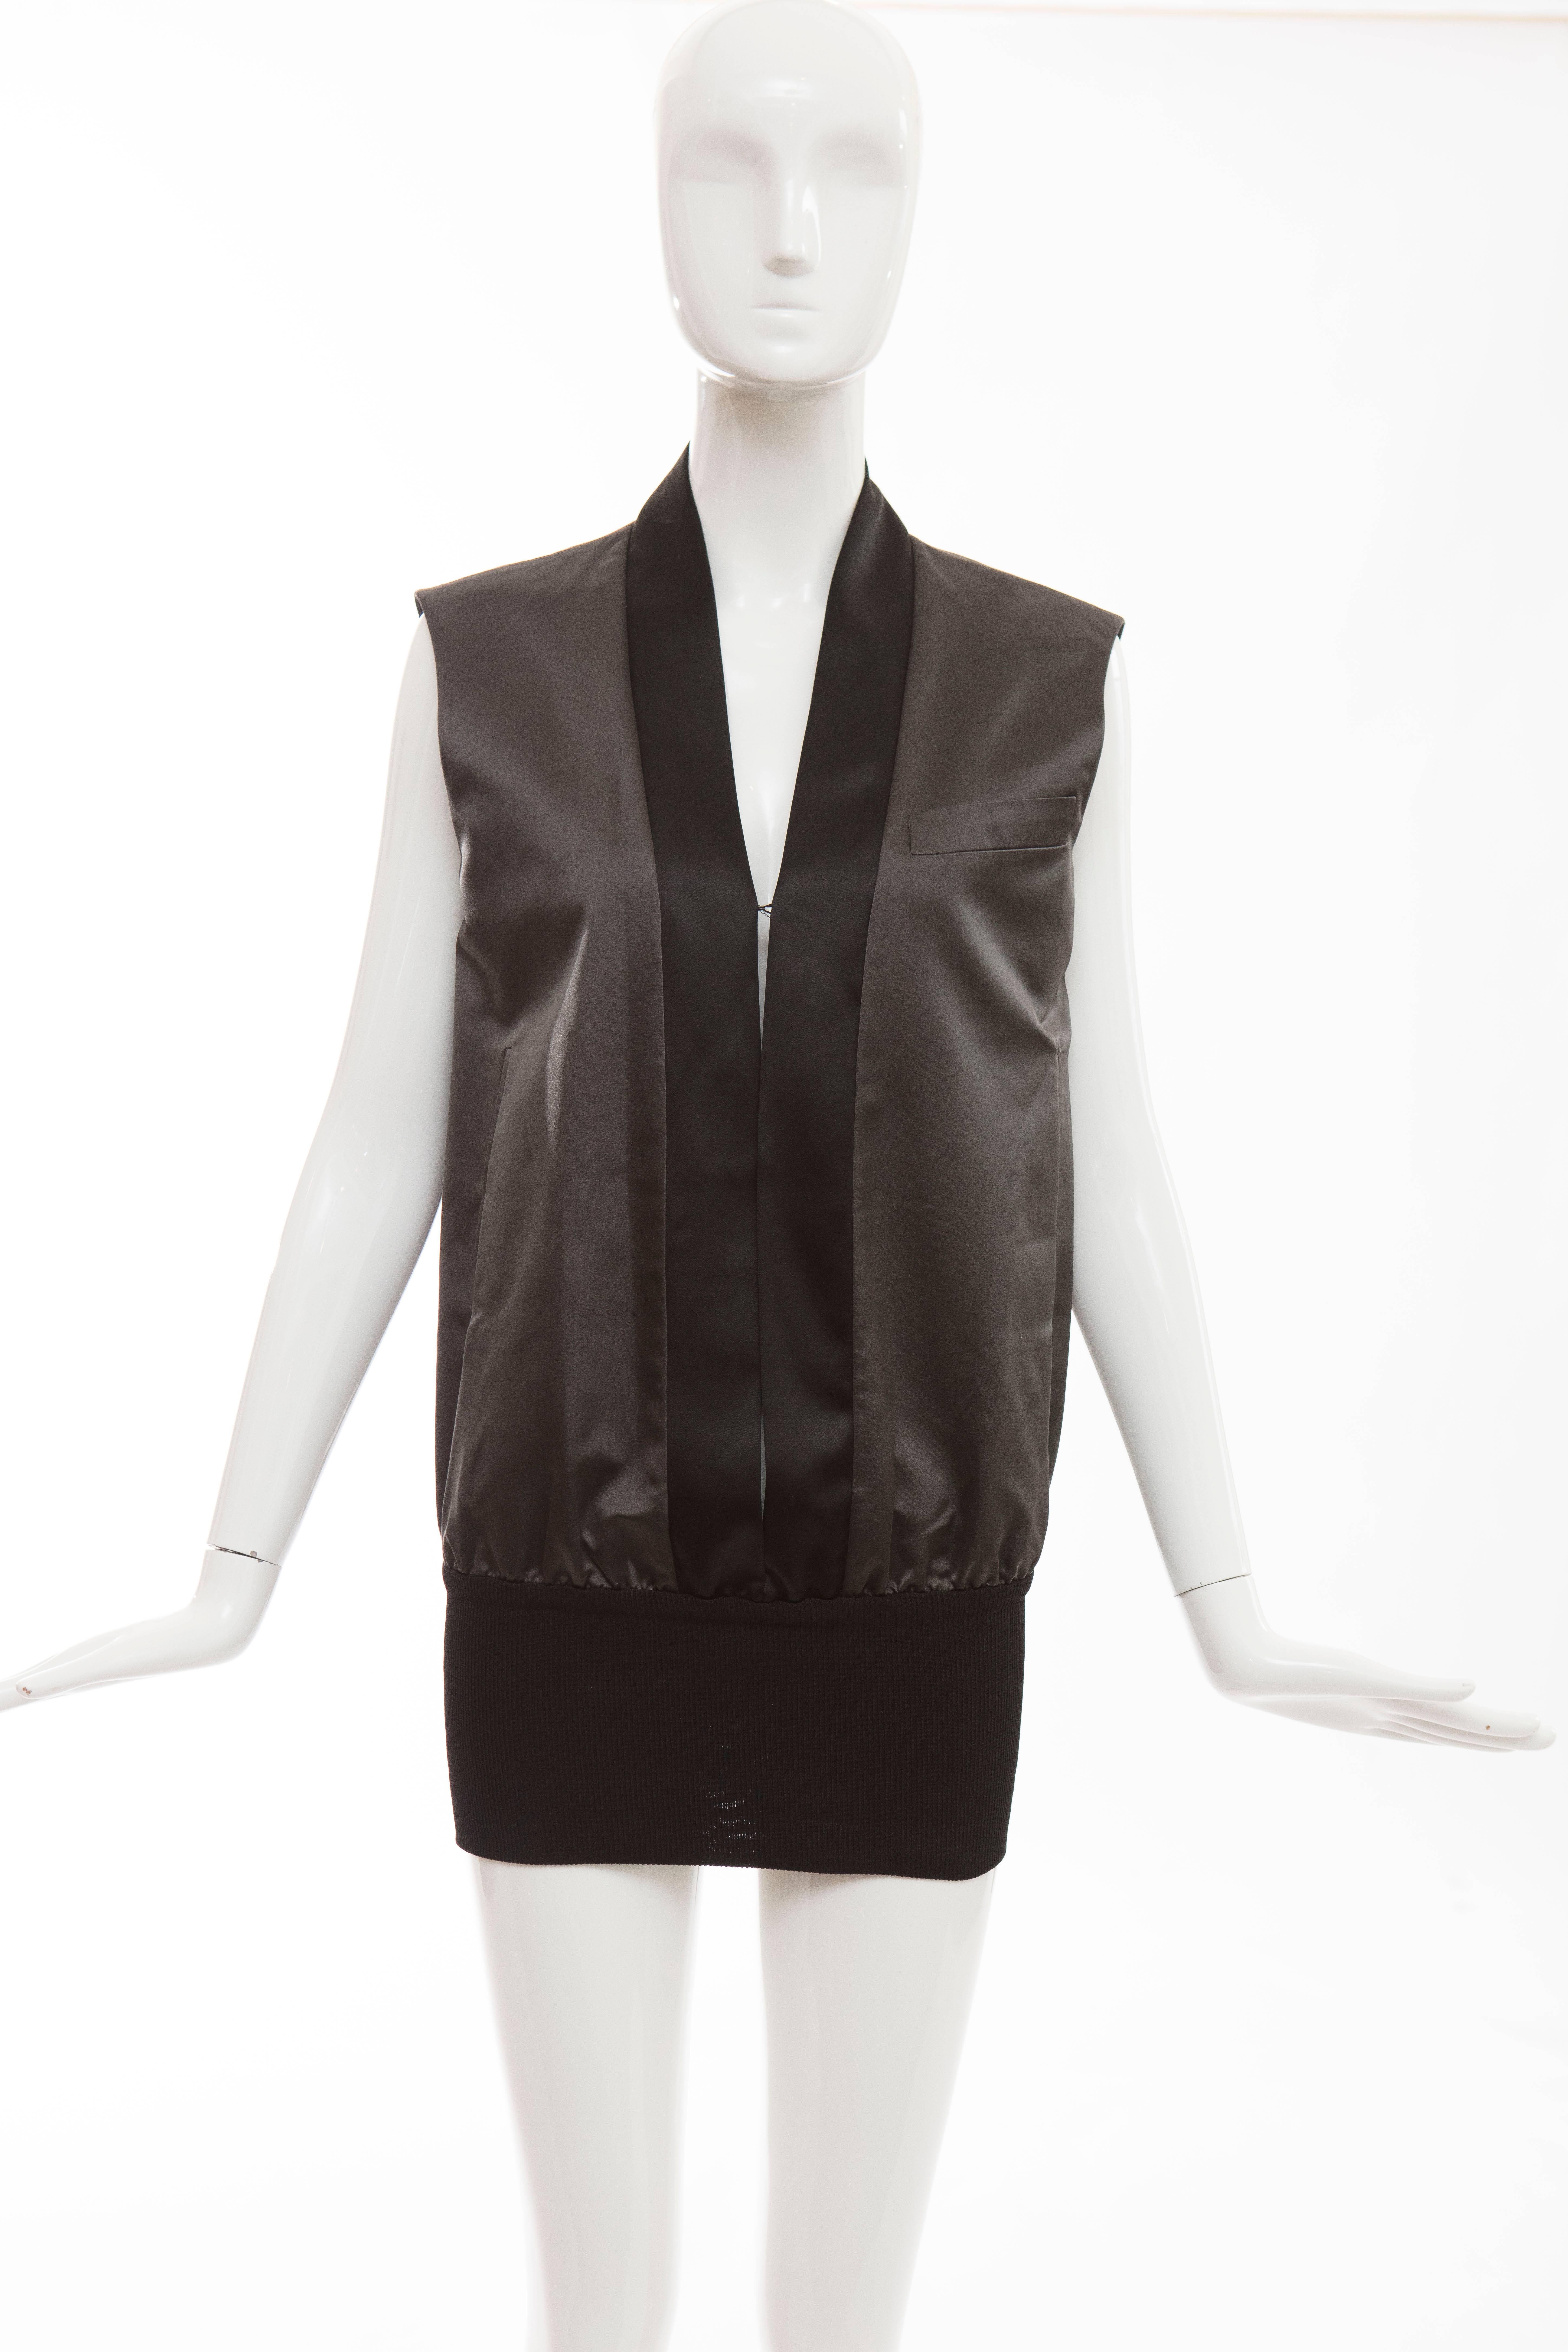 John Bartlett, Autumn - Winter 1999 (sample item) charcoal grey Duchess silk satin vest with black Duchess silk satin trim and black ribbed cotton waist, two front pockets, one faux pocket, hook-and-eye closure and fully lined.

IT. 40
US. 4

Bust